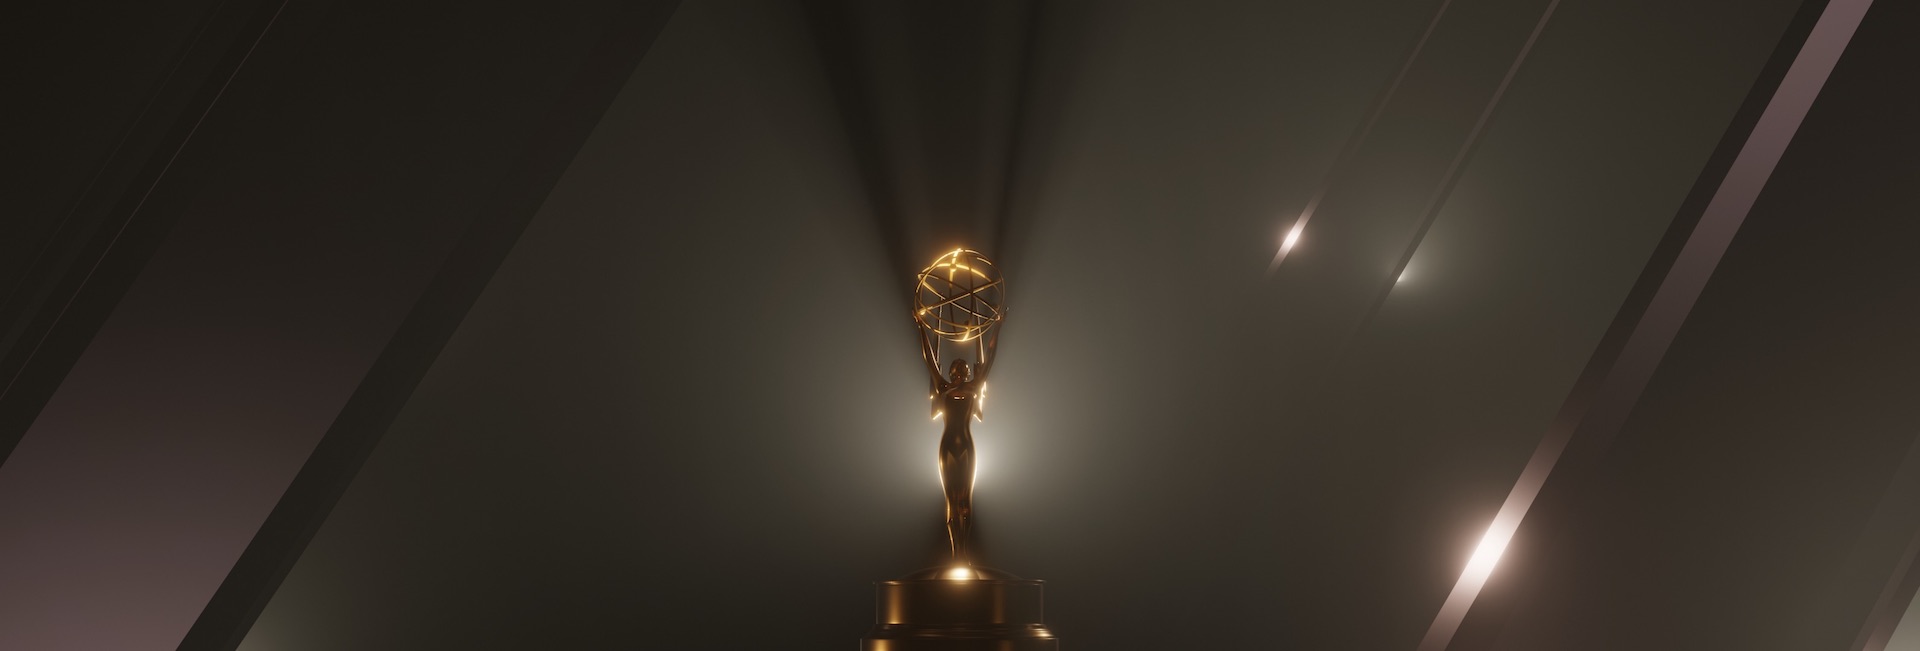 EMMYS 2018 Motion Graphics